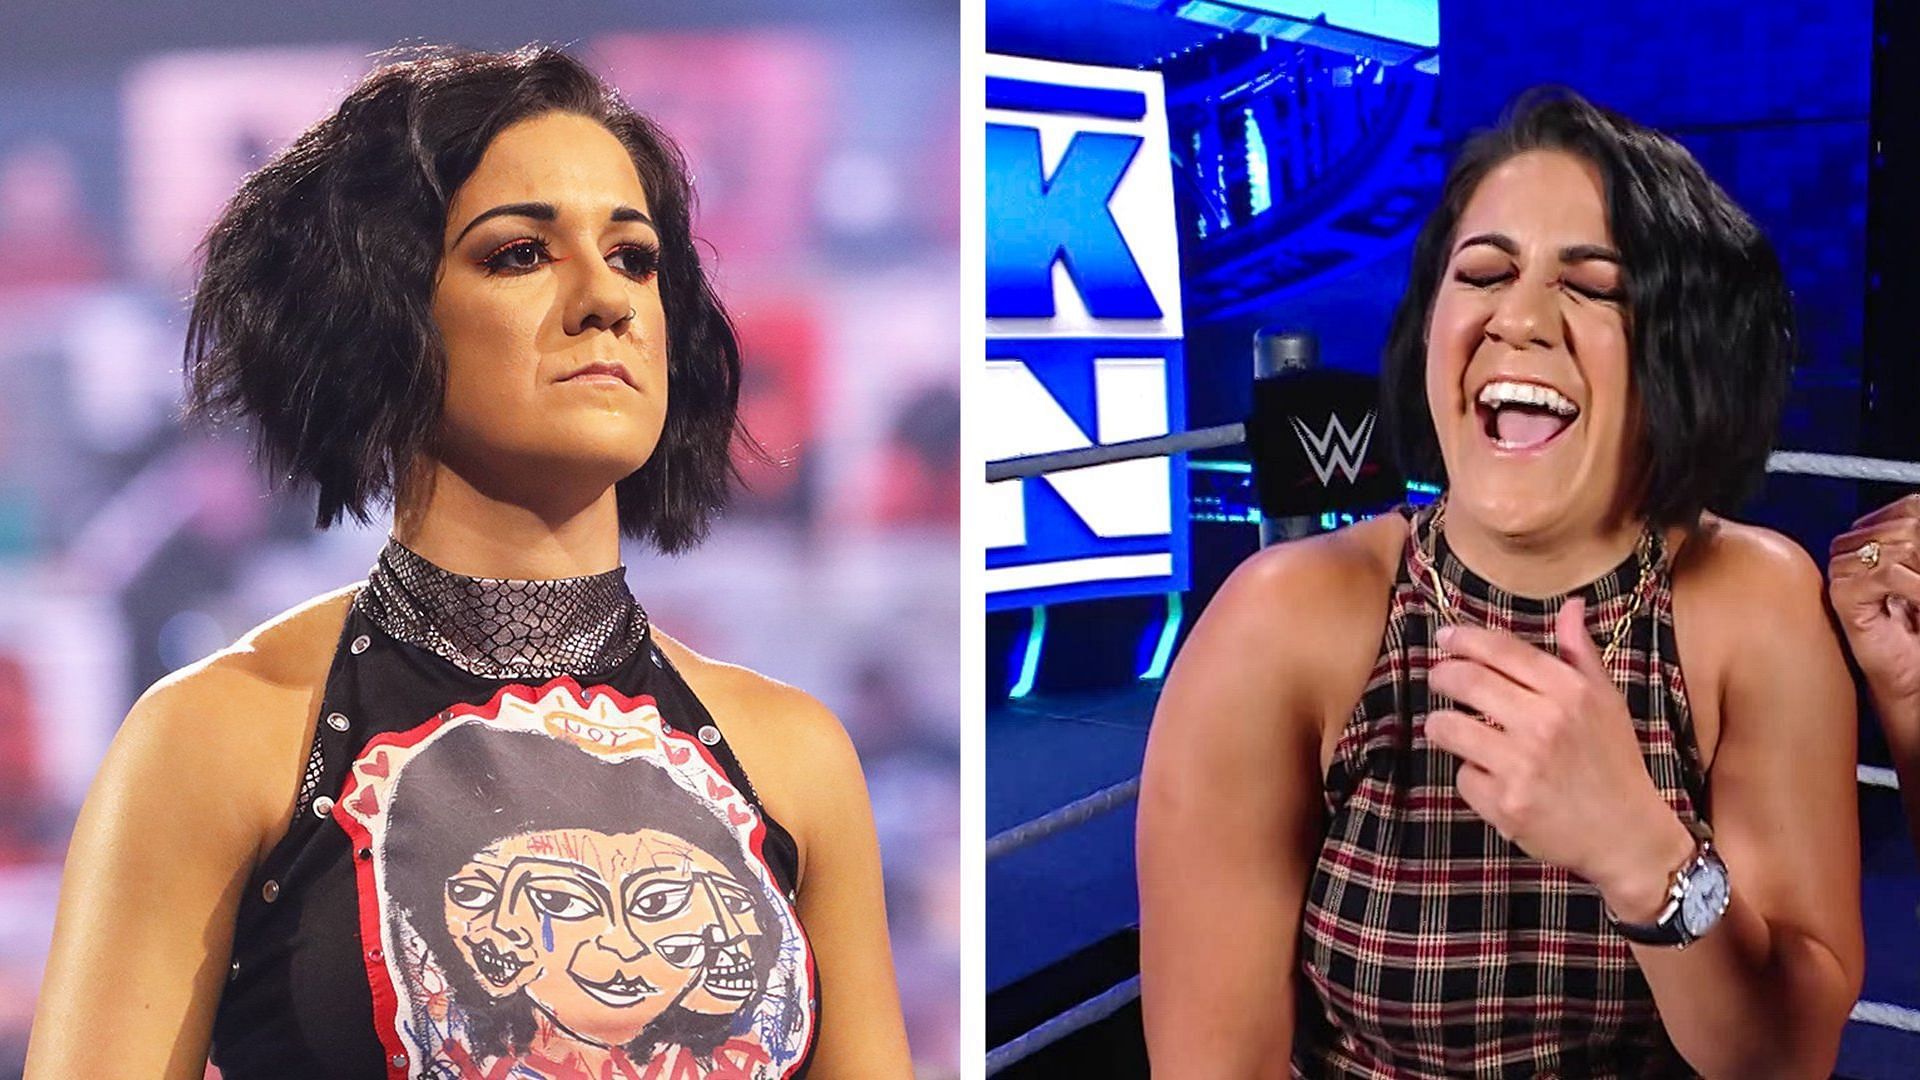 Bayley could potentially team up with another WWE Superstar